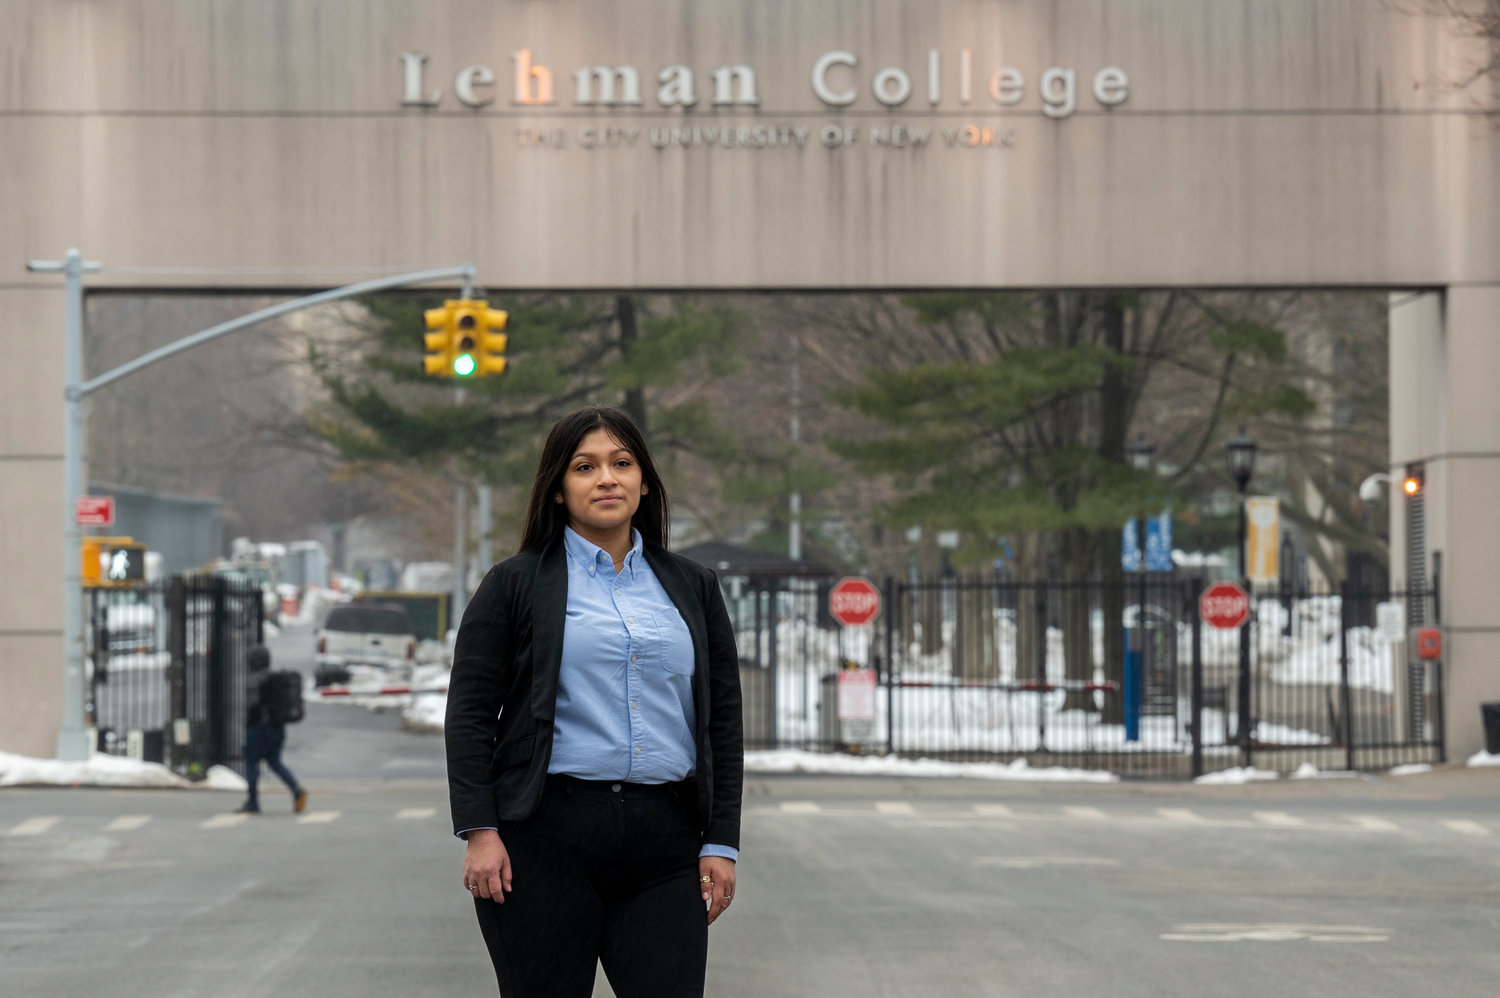 Raishiel Muniz might only be in her first year at Lehman College, but she’s already scored an internship at U.S. Rep Ritchie Torres’ local congressional office. She’s one of 40 students participating in the Bronx Recovery Corps, a program designed to help Lehman students like herself develop career skills while supplying local businesses and non-profits with extra assistance in wake of the coronavirus pandemic.